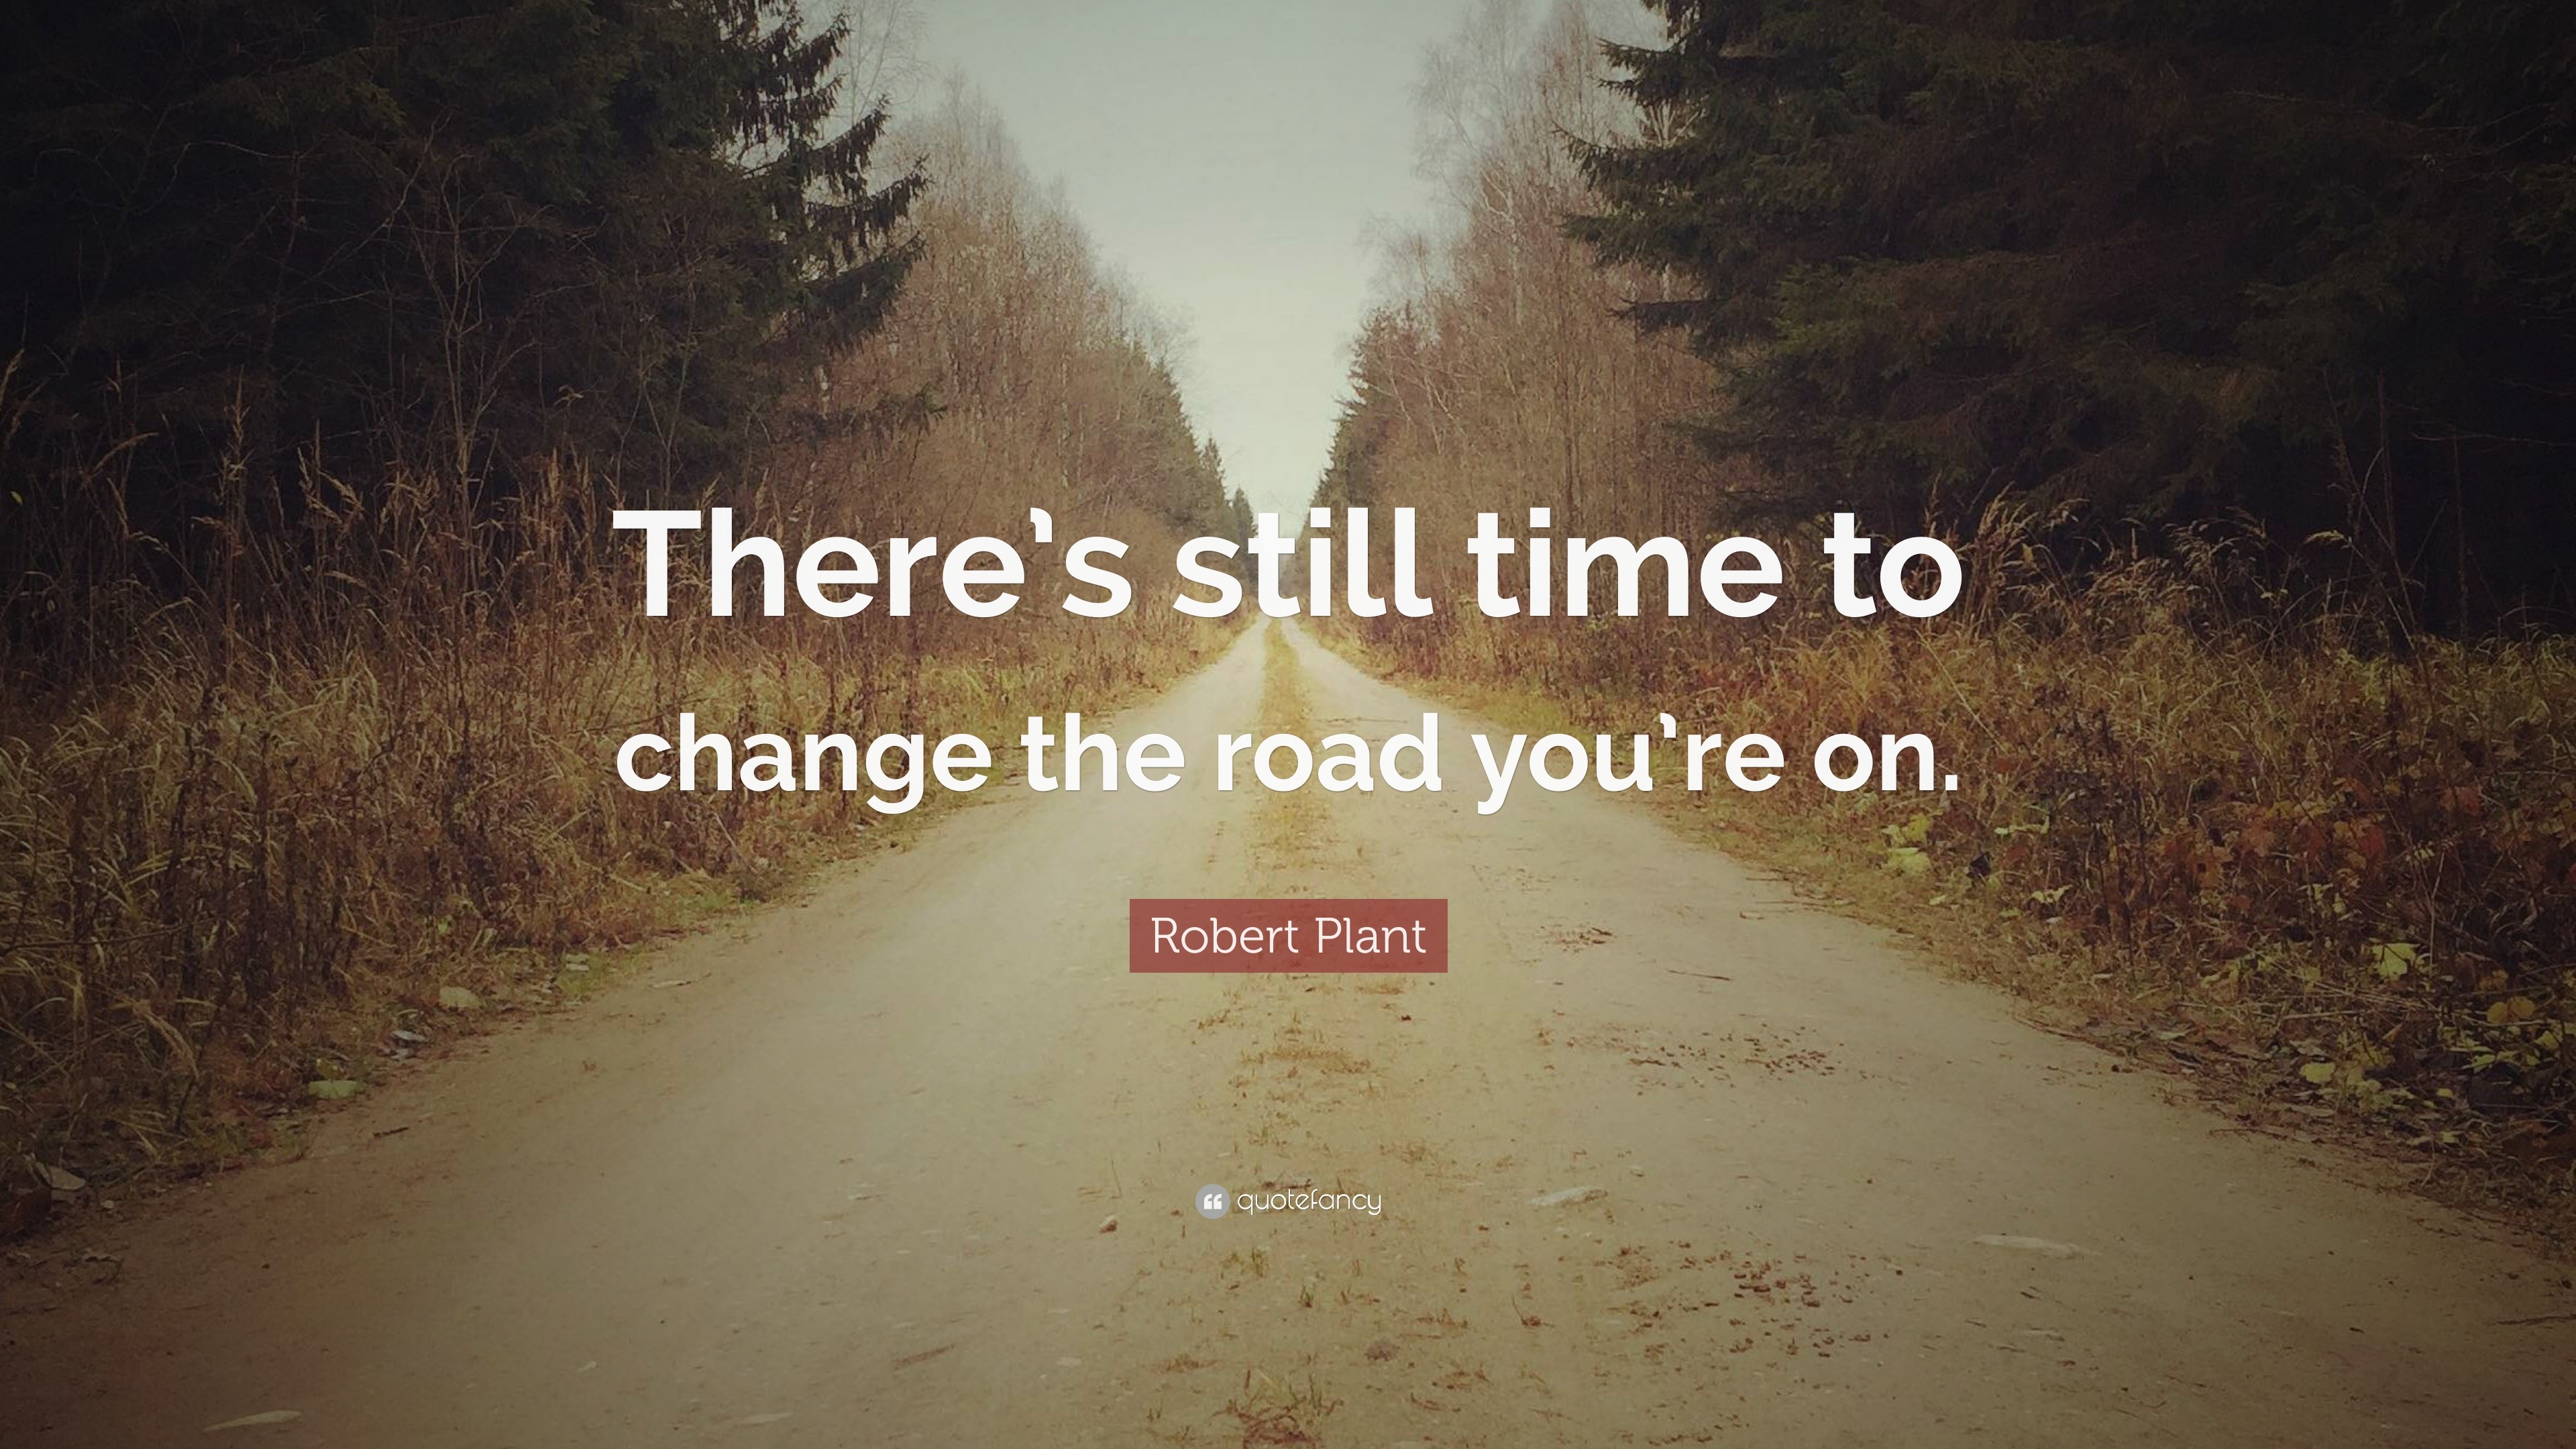 Robert Plant Quote: still time to change road you're on.”